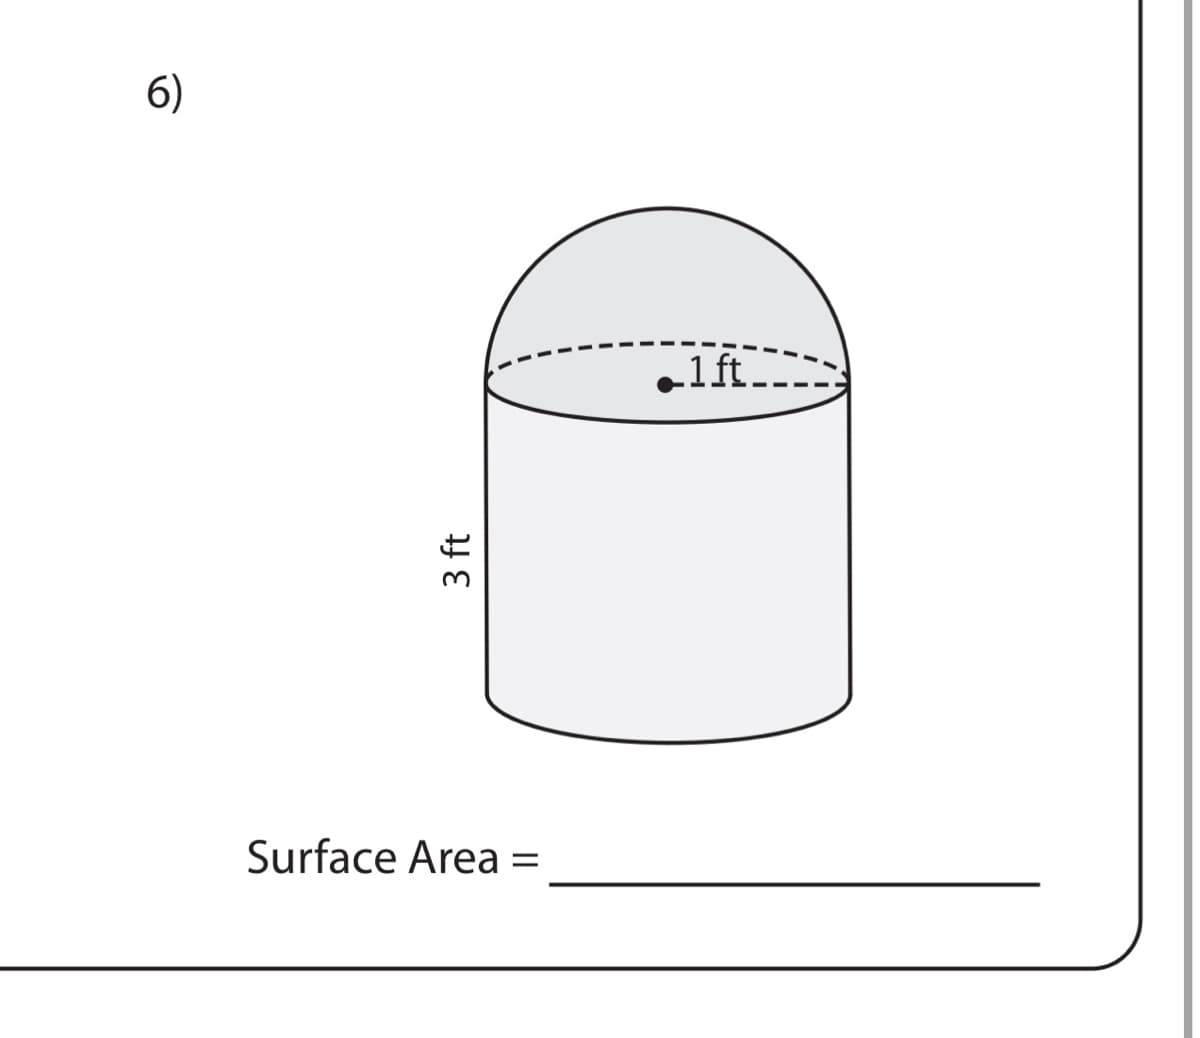 6)
.1ft.
Surface Area =
3 ft
